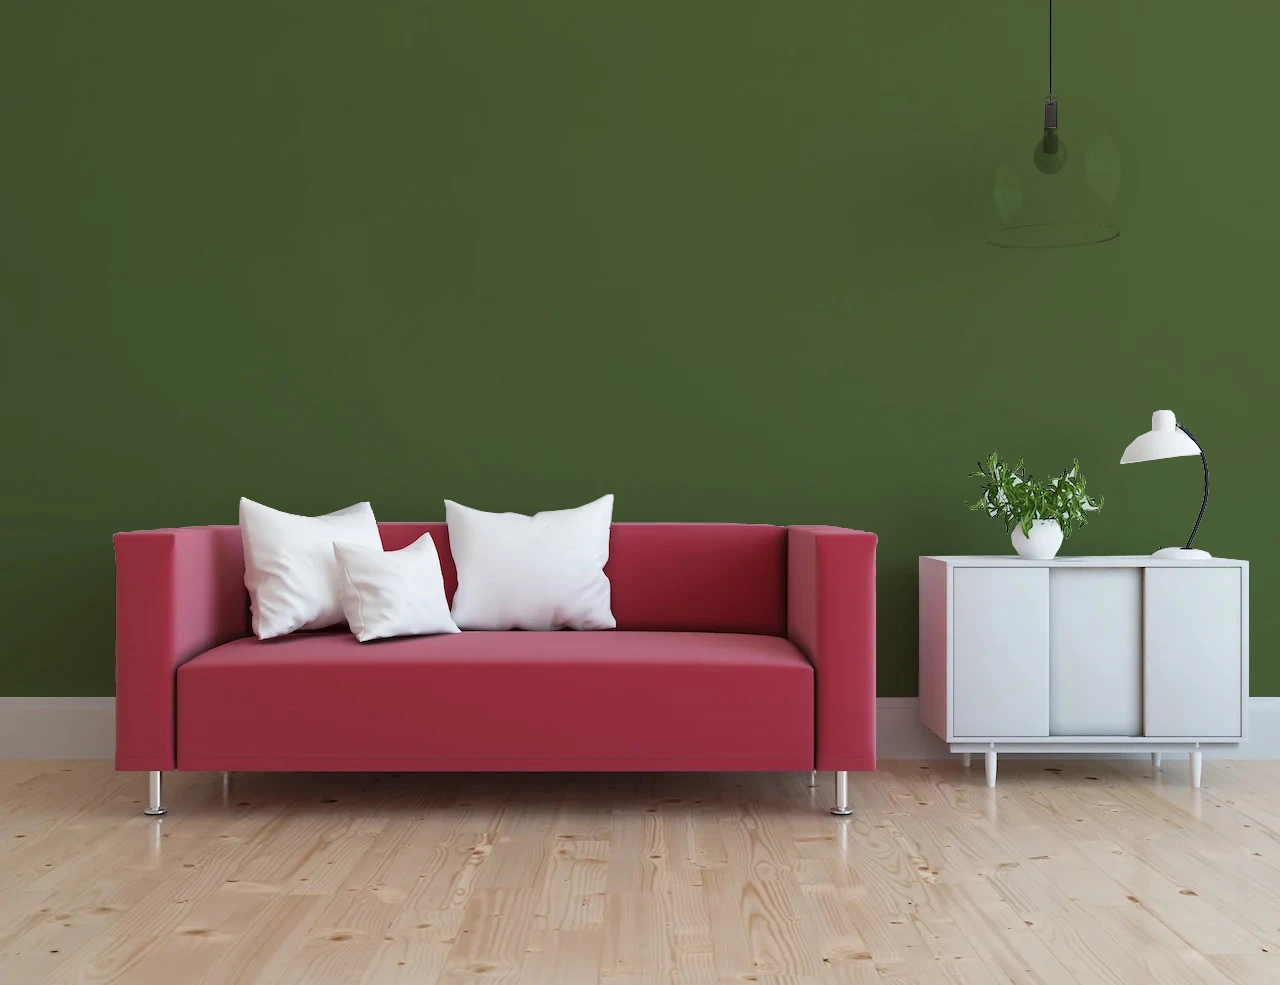 dark olive green walls with red couch